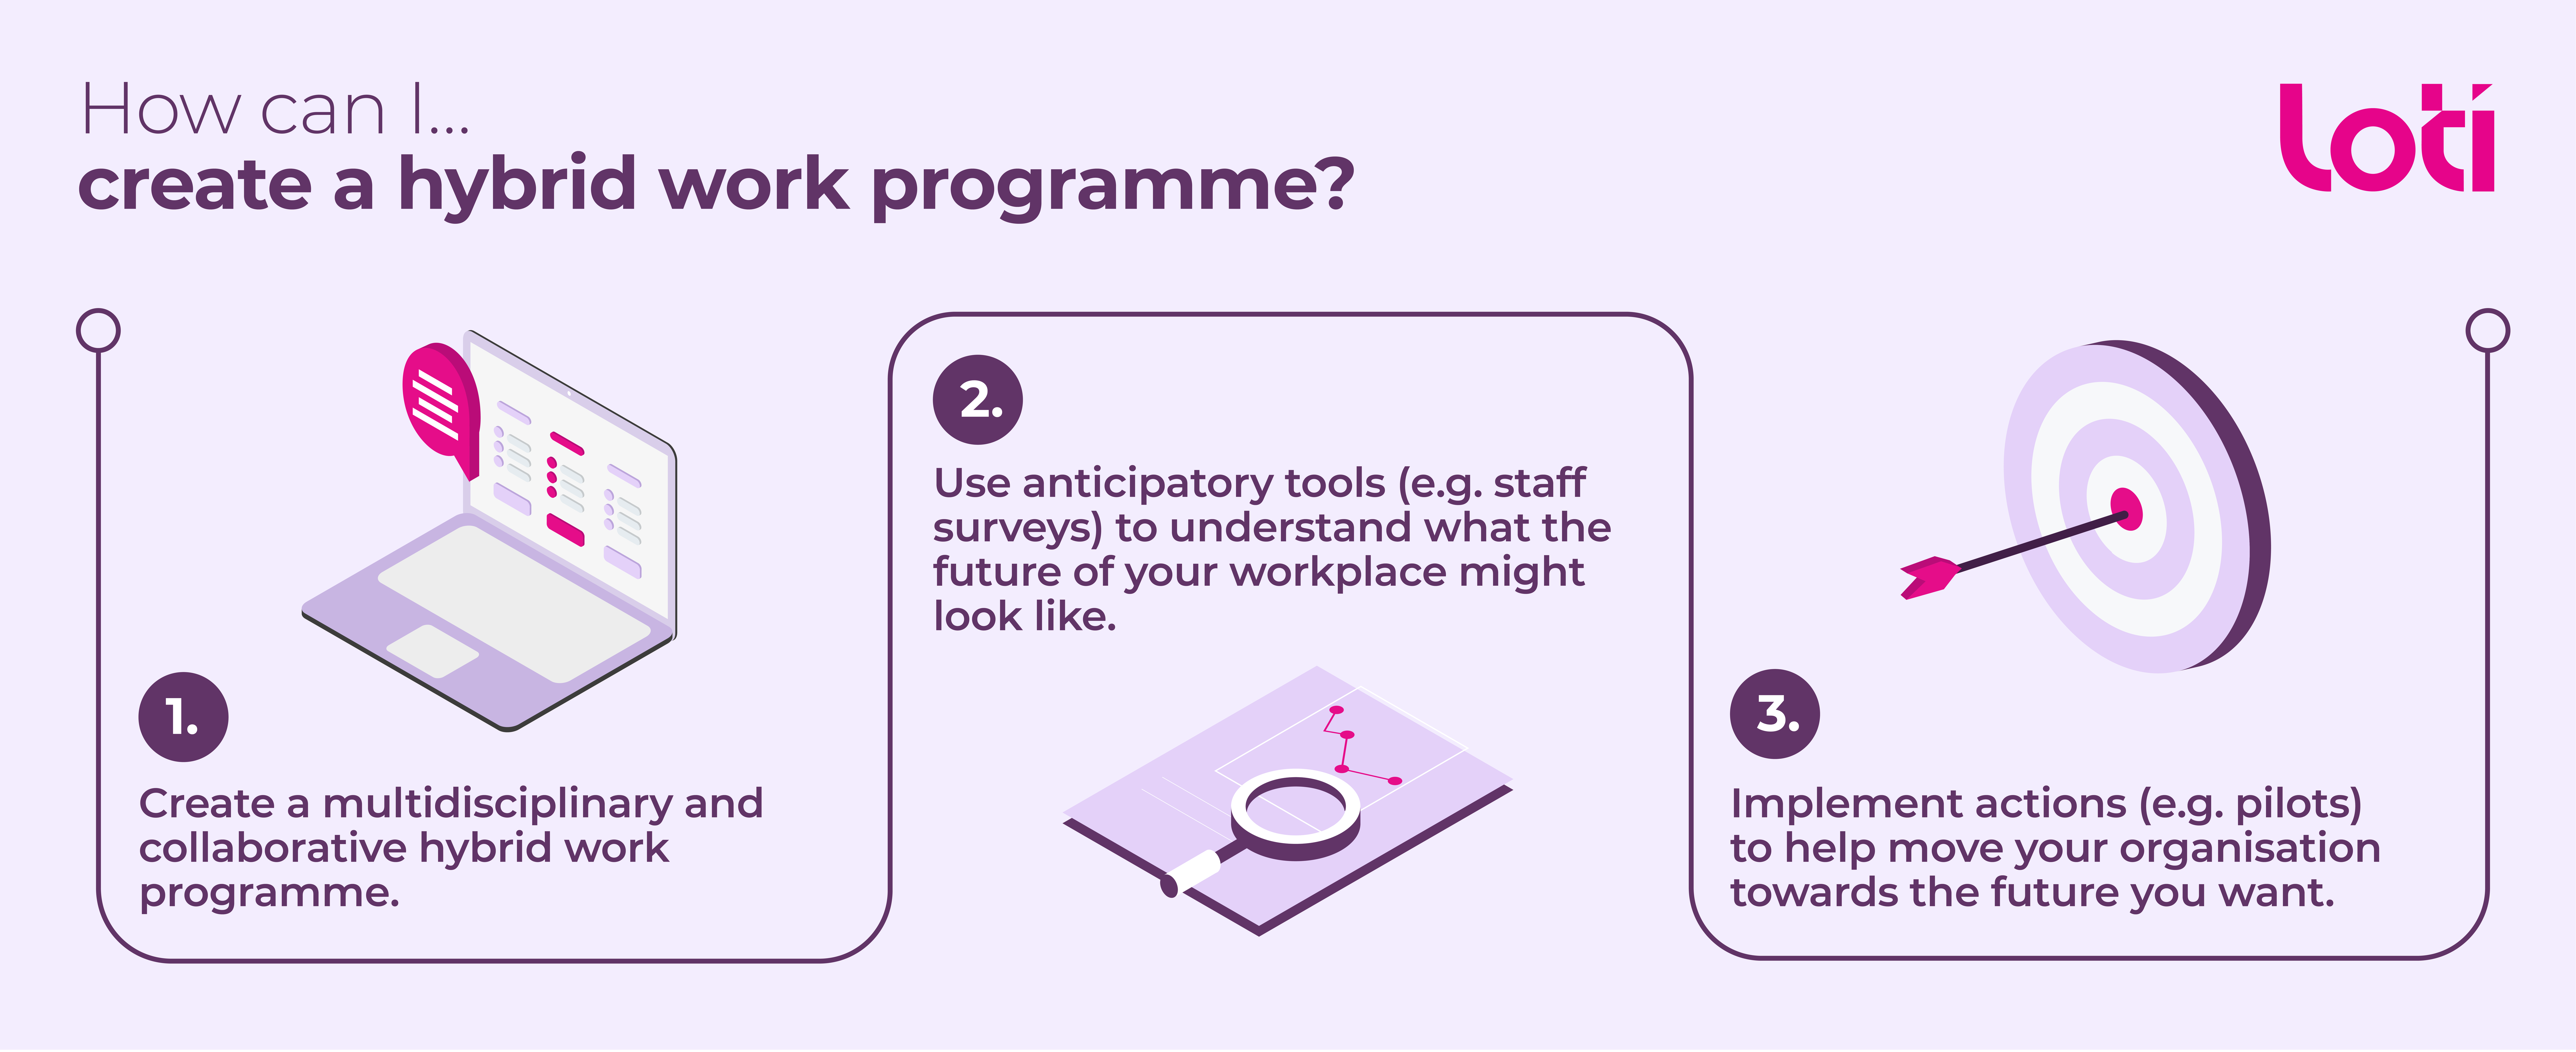 An infographic illustrating How can I… create a hybrid work programme? Create a multidisciplinary and collaborative hybrid work programme. Use anticipatory tools (e.g. staff surveys) to understand what the future of your workplace might look like. Implement actions (e.g. pilots) to help move your organisation towards the future you want.